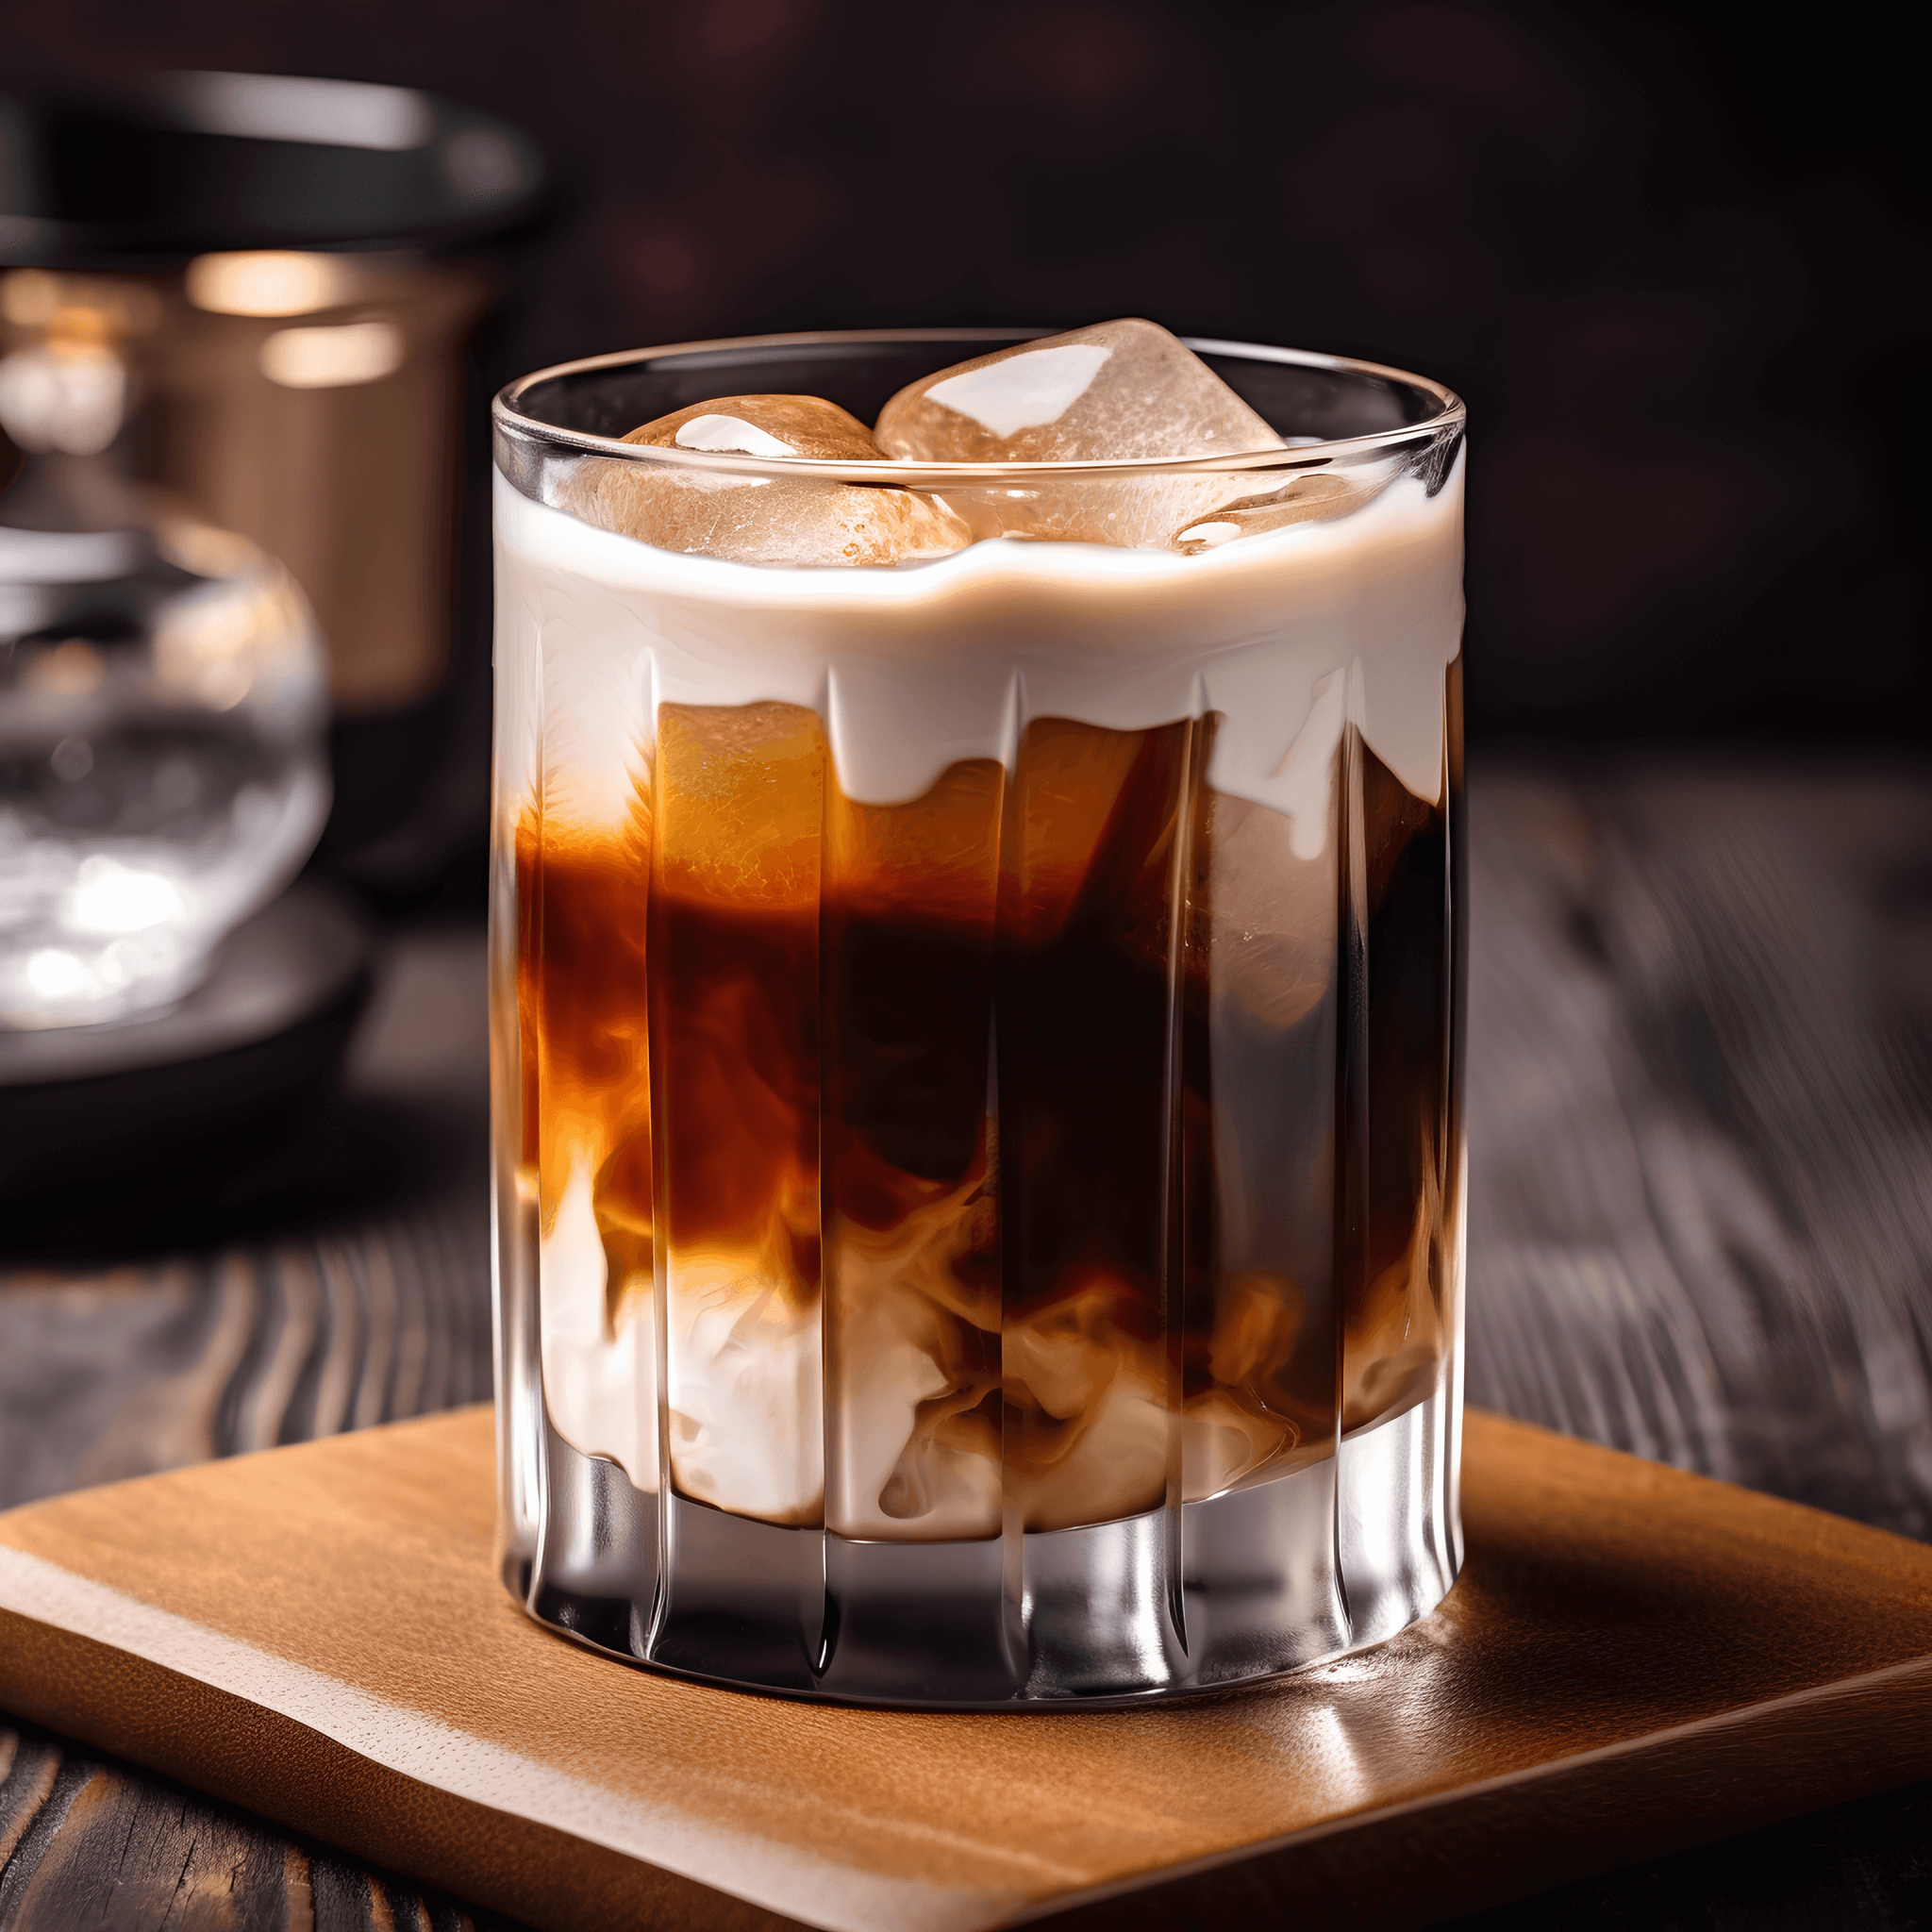 The White Russian is a creamy, sweet, and slightly strong cocktail. The combination of vodka, coffee liqueur, and cream creates a rich and indulgent flavor profile that is both comforting and satisfying.